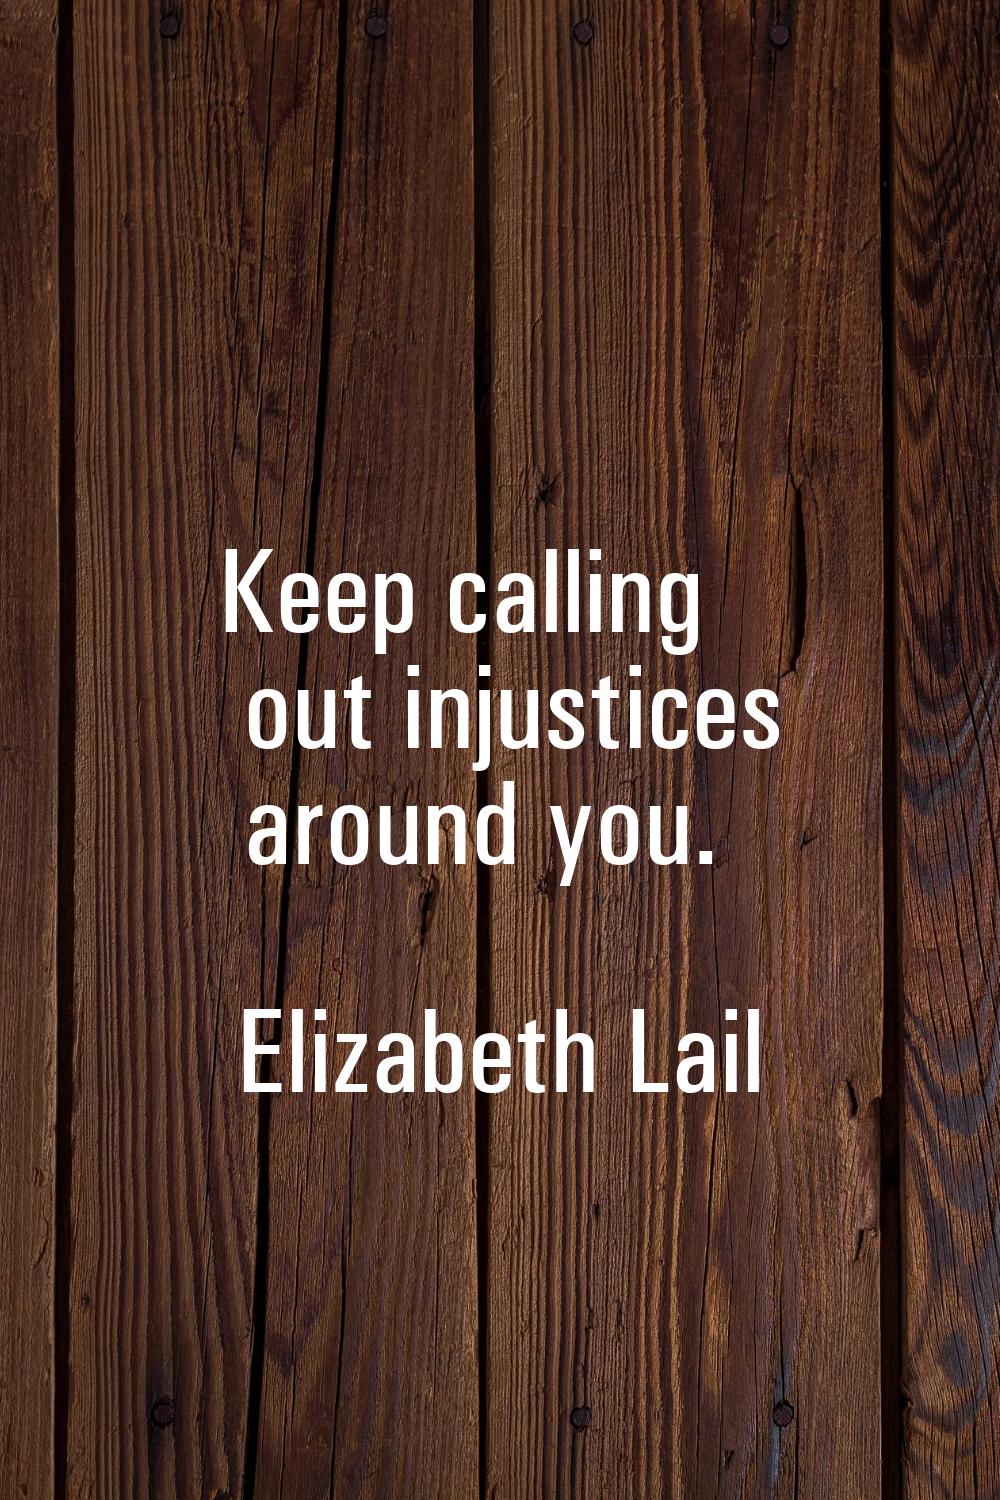 Keep calling out injustices around you.